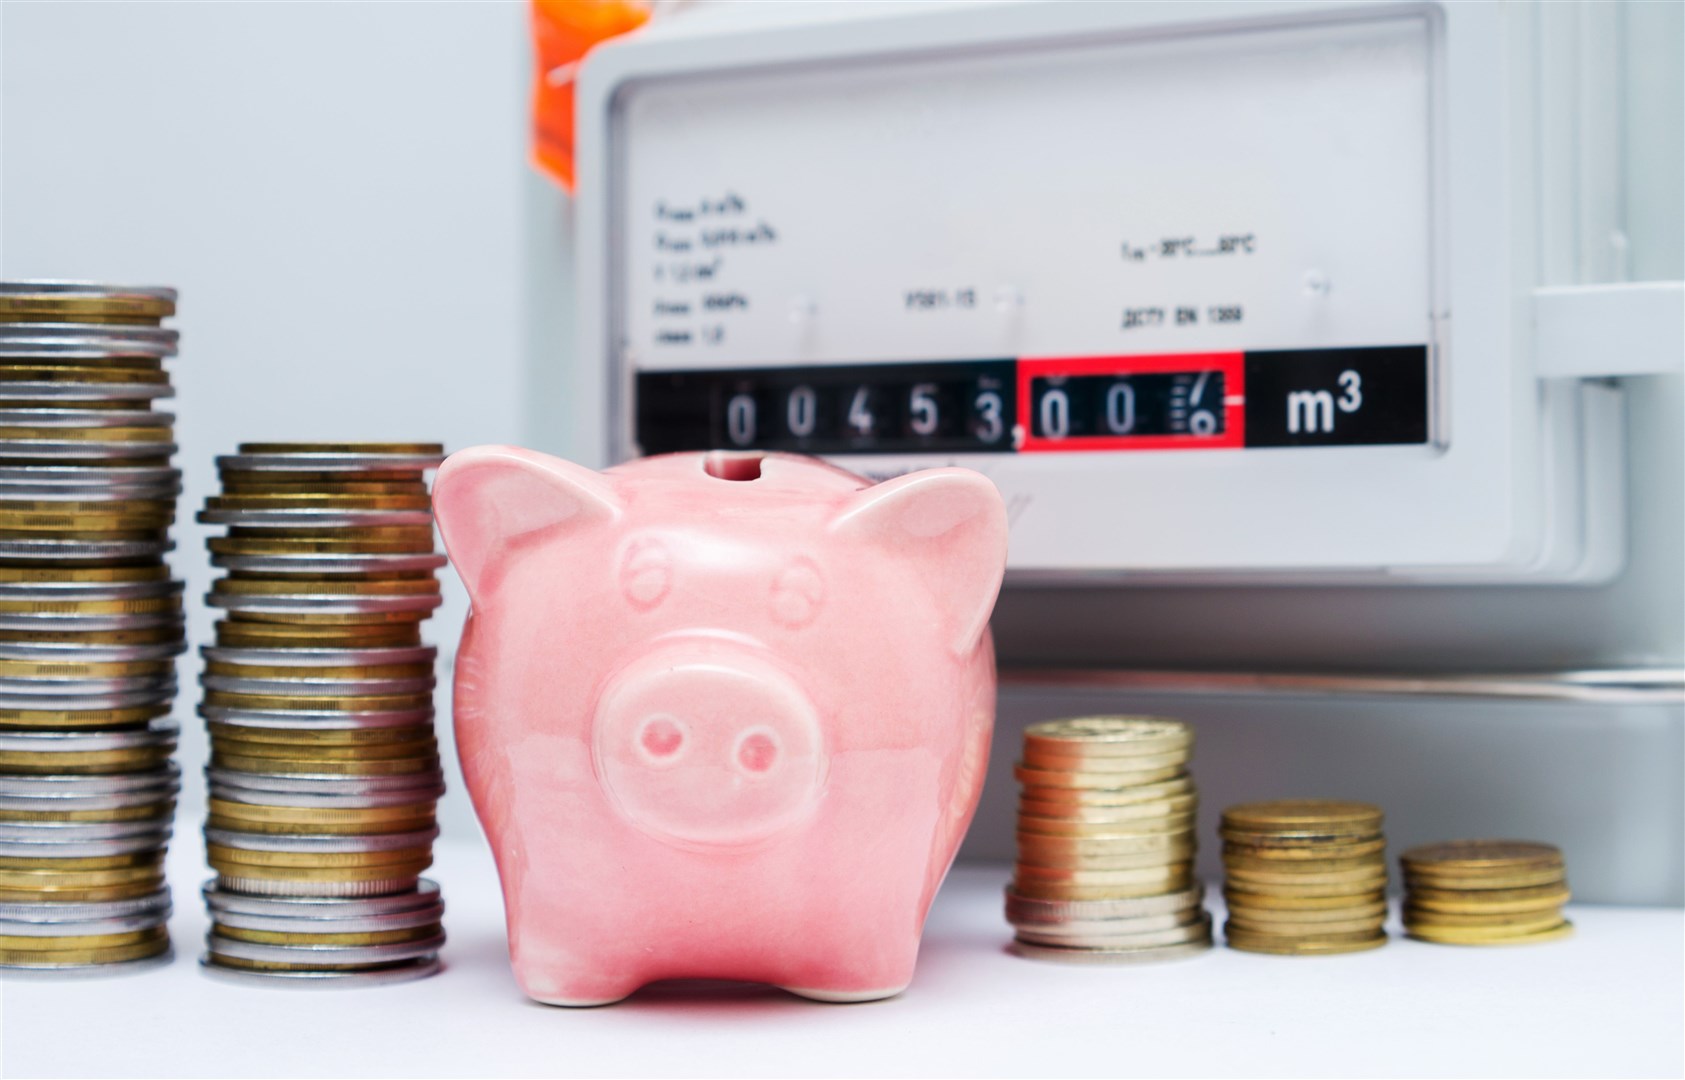 Take some small steps and you could save more than pennies on your heating bill this winter.